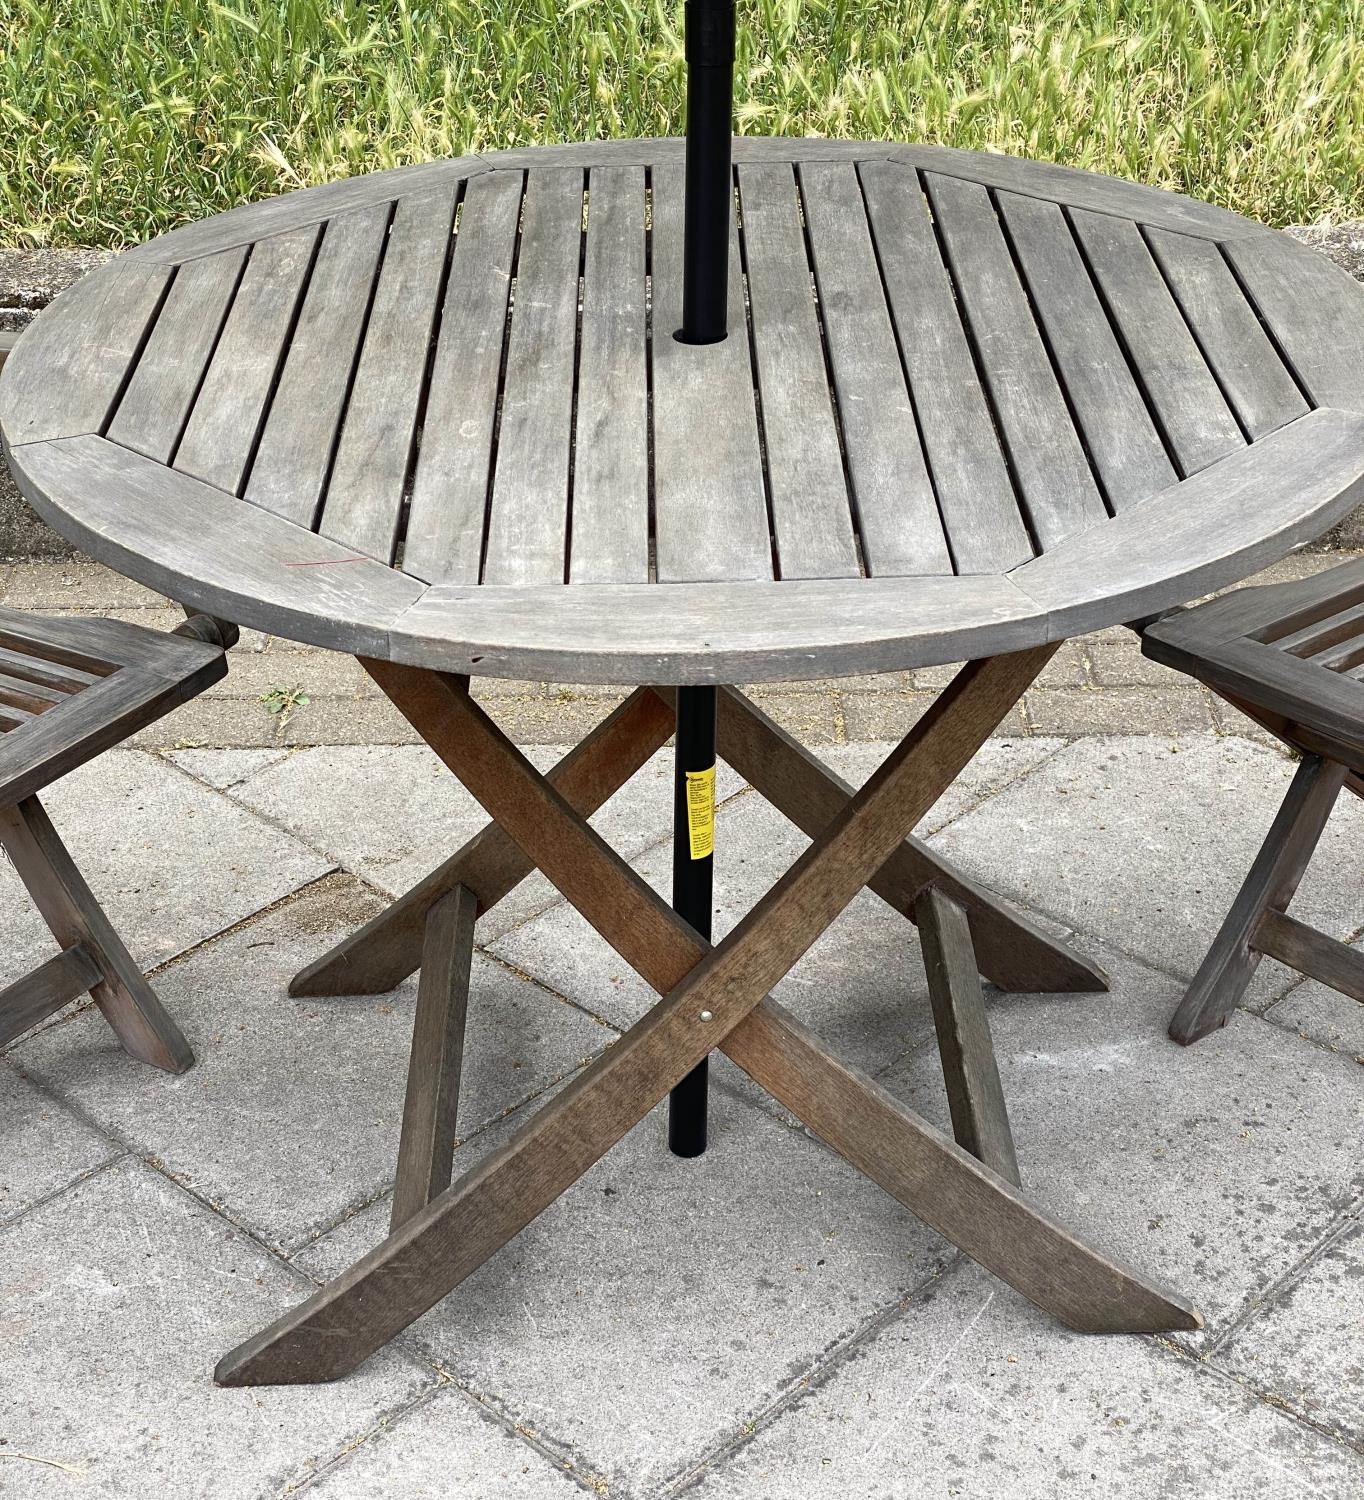 GARDEN TABLE AND CHAIRS, weathered teak circular folding with two arm chairs, table 100cm W x 73cm - Image 3 of 5